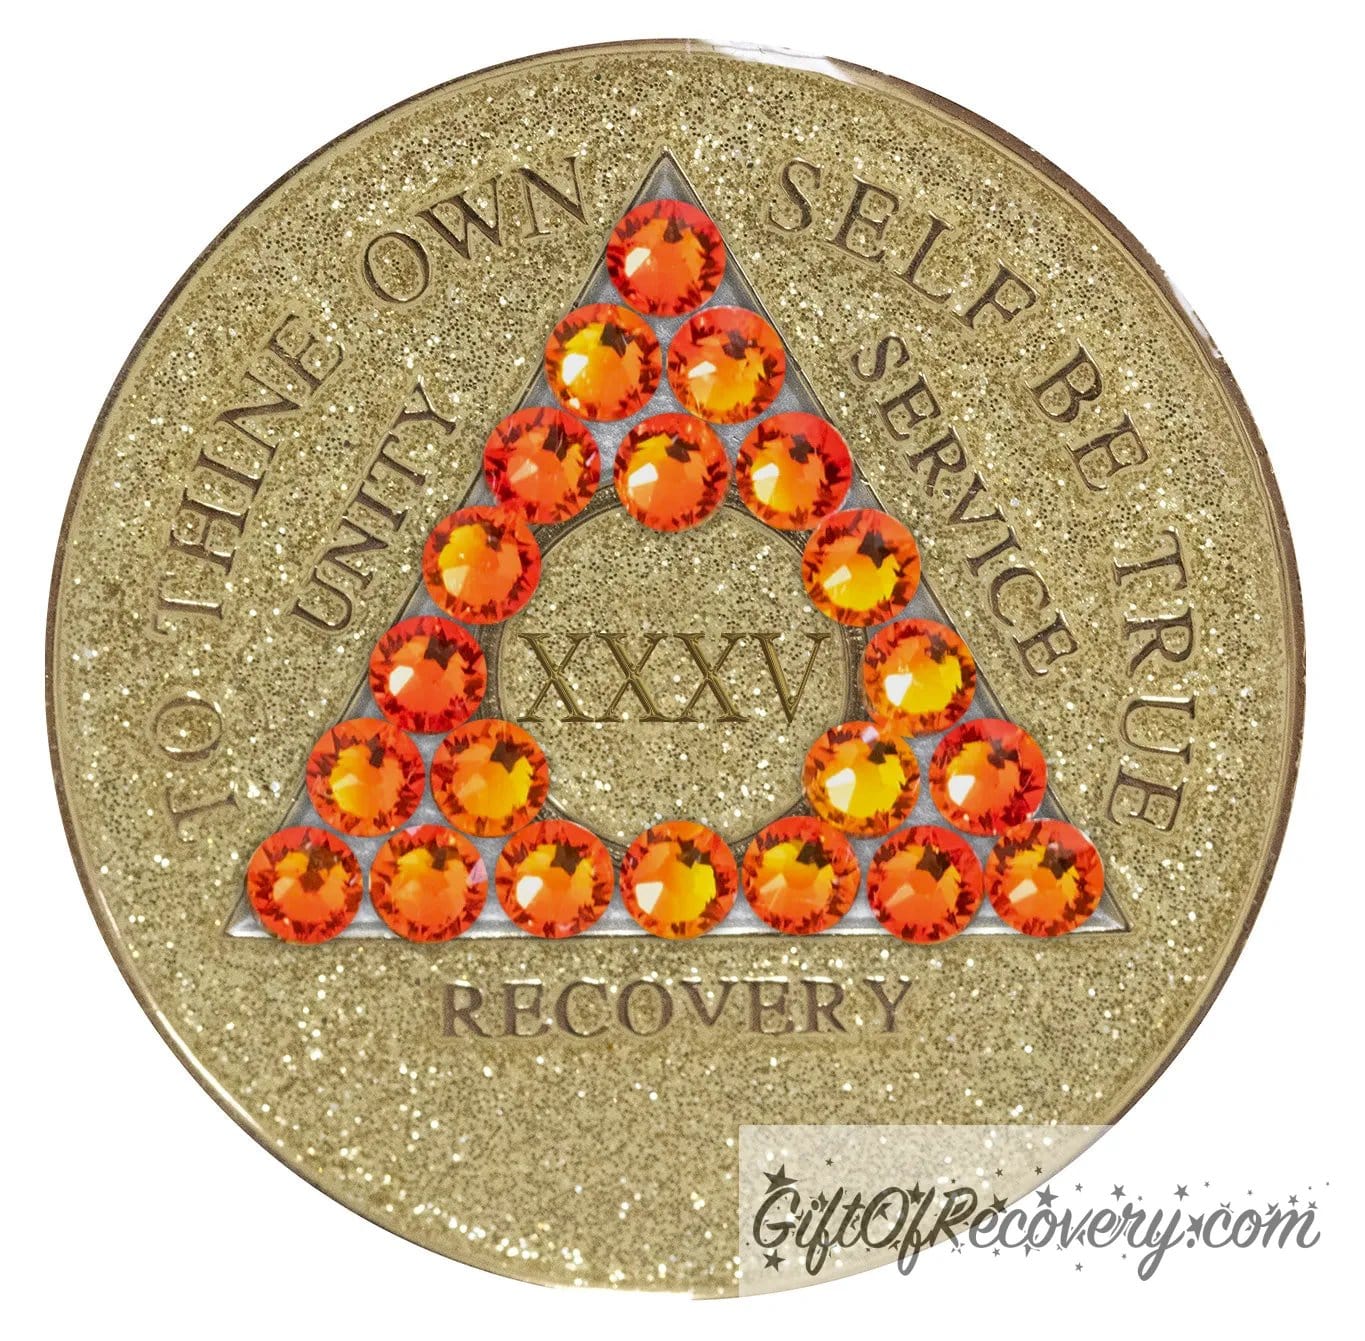 35 year Gold glitter AA medallion with twenty-one fire opal genuine crystals in the shape of a triangle, to thine own self be true, unity, service, recovery embossed in 14k gold-plated brass along with the rim of the medallion, sealed in a high-quality, chip and scratch-resistant resin dome giving it a beautiful glossy look that will last.